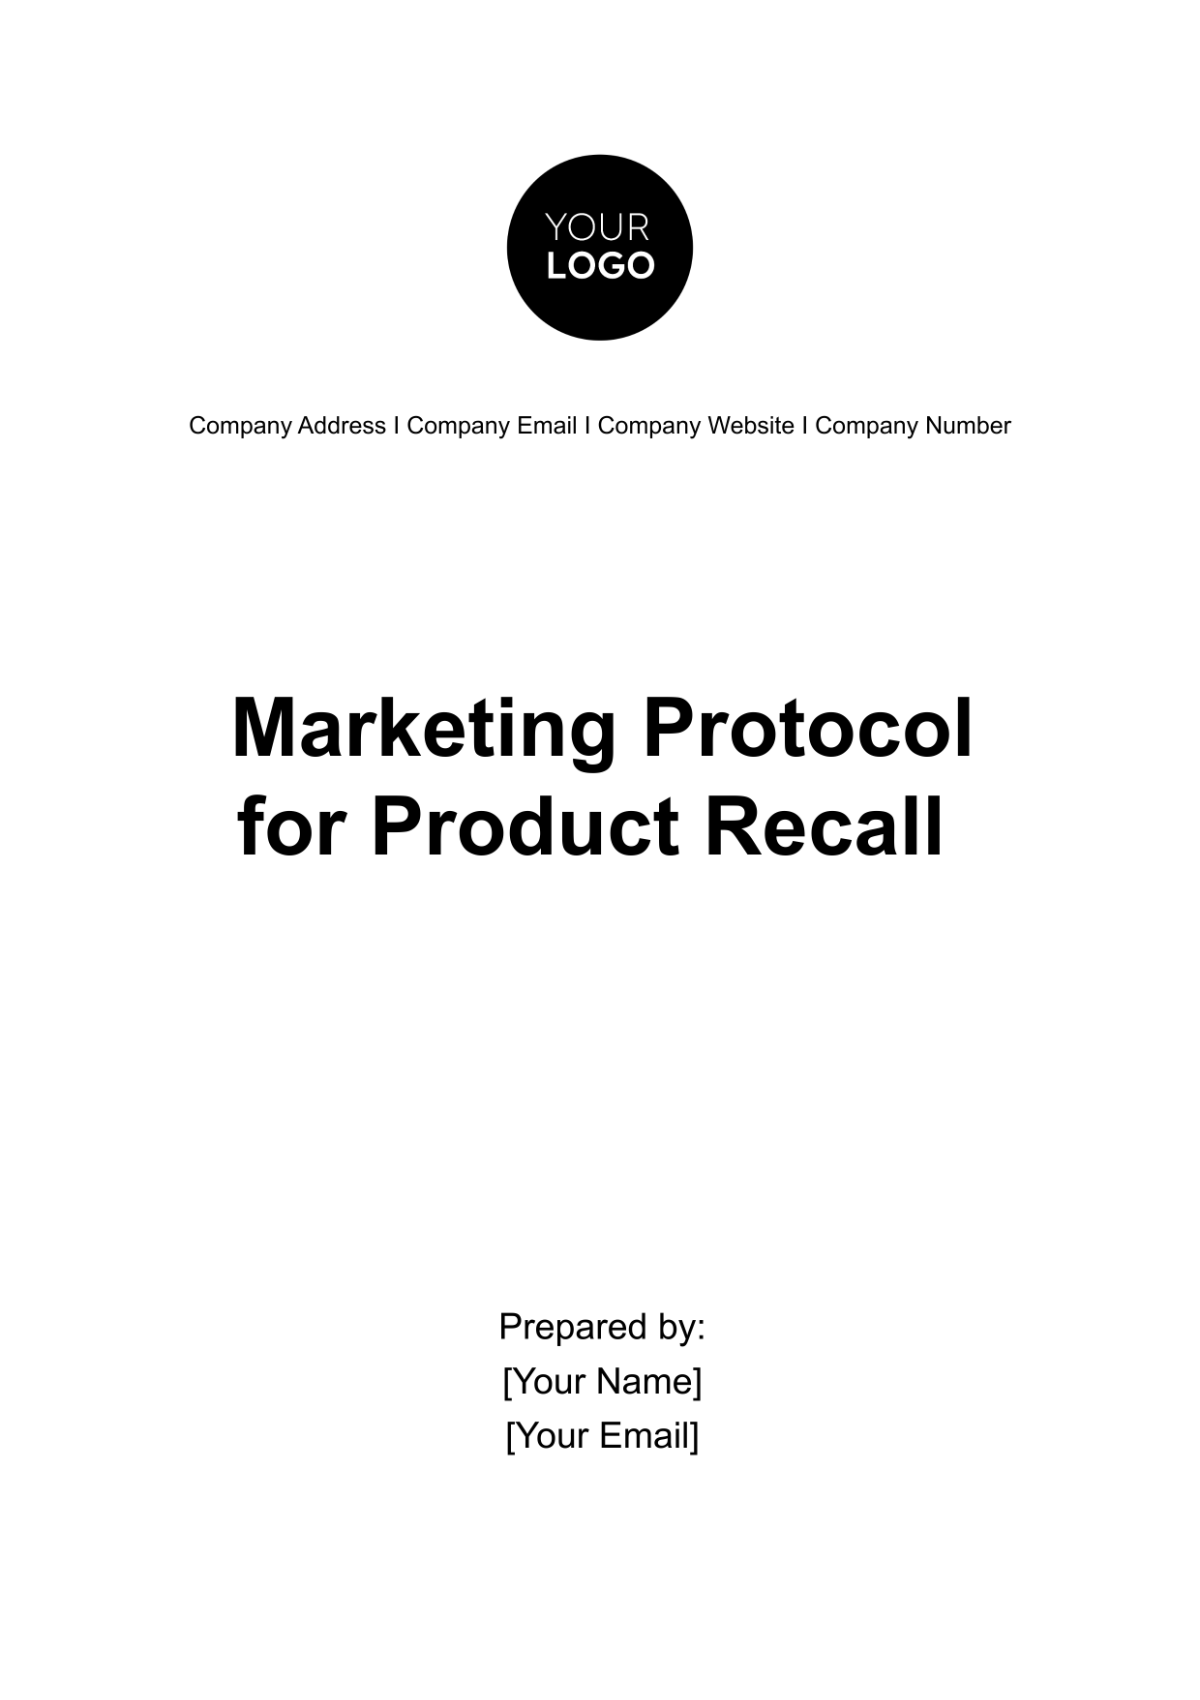 Free Marketing Protocol for Product Recall Template